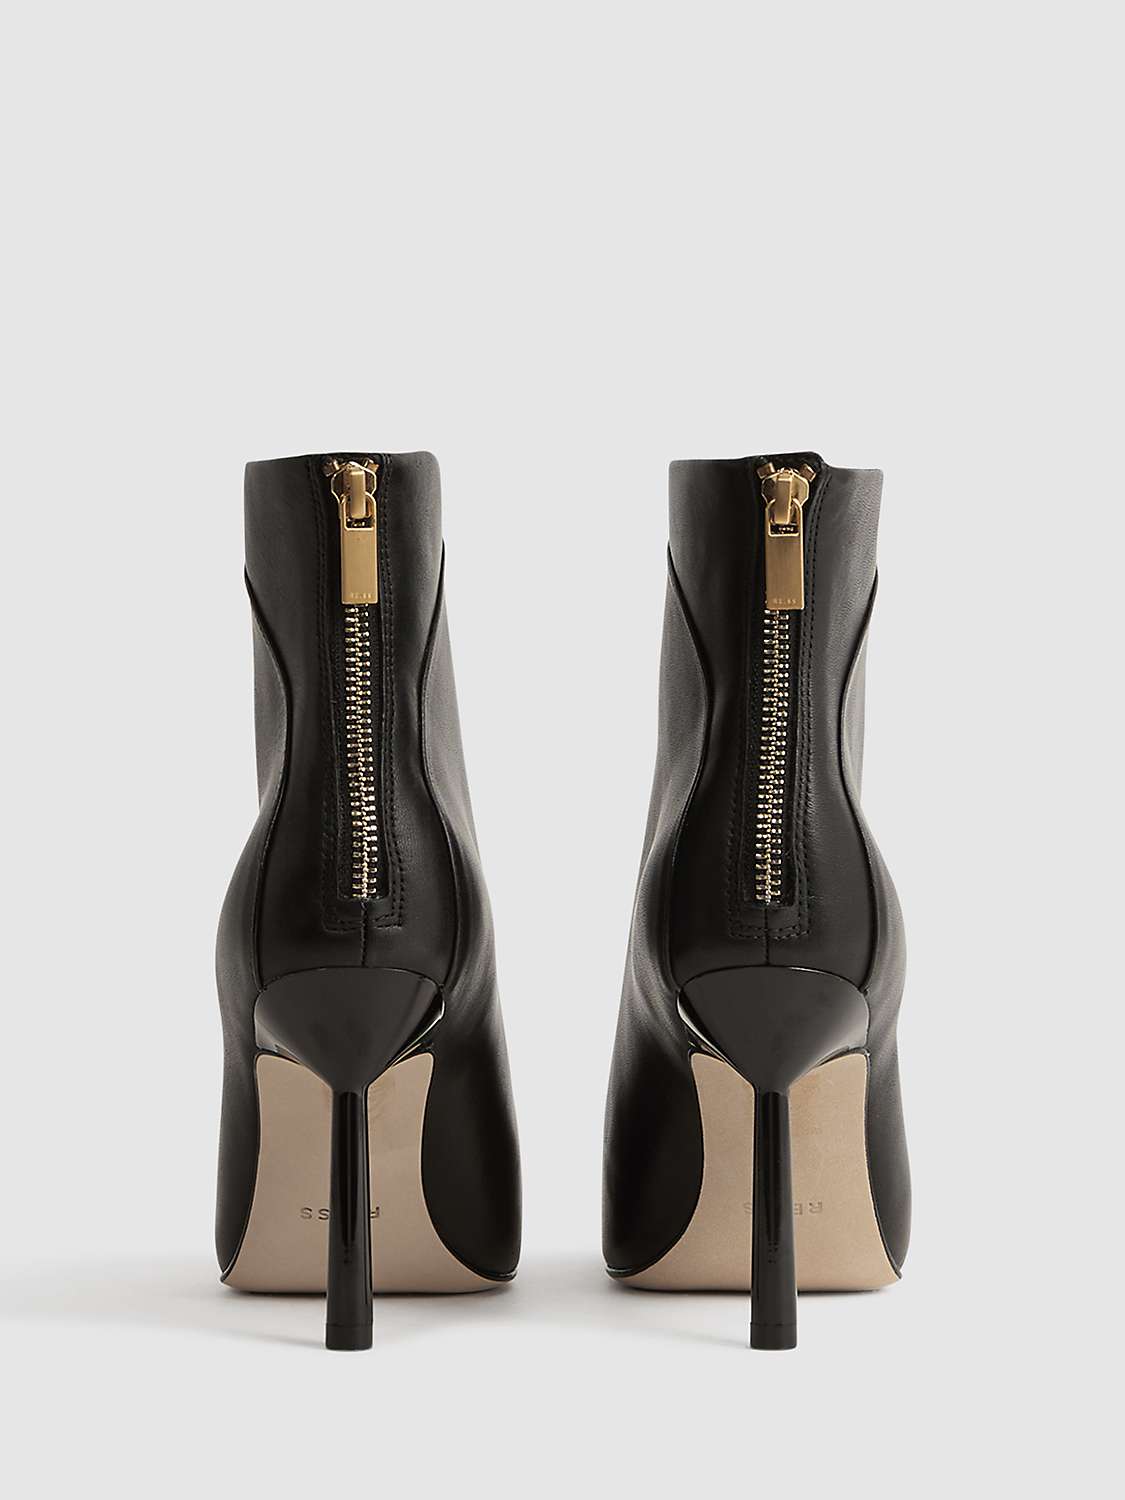 Buy Reiss Lyra Signature Leather Stiletto Ankle Boots Online at johnlewis.com